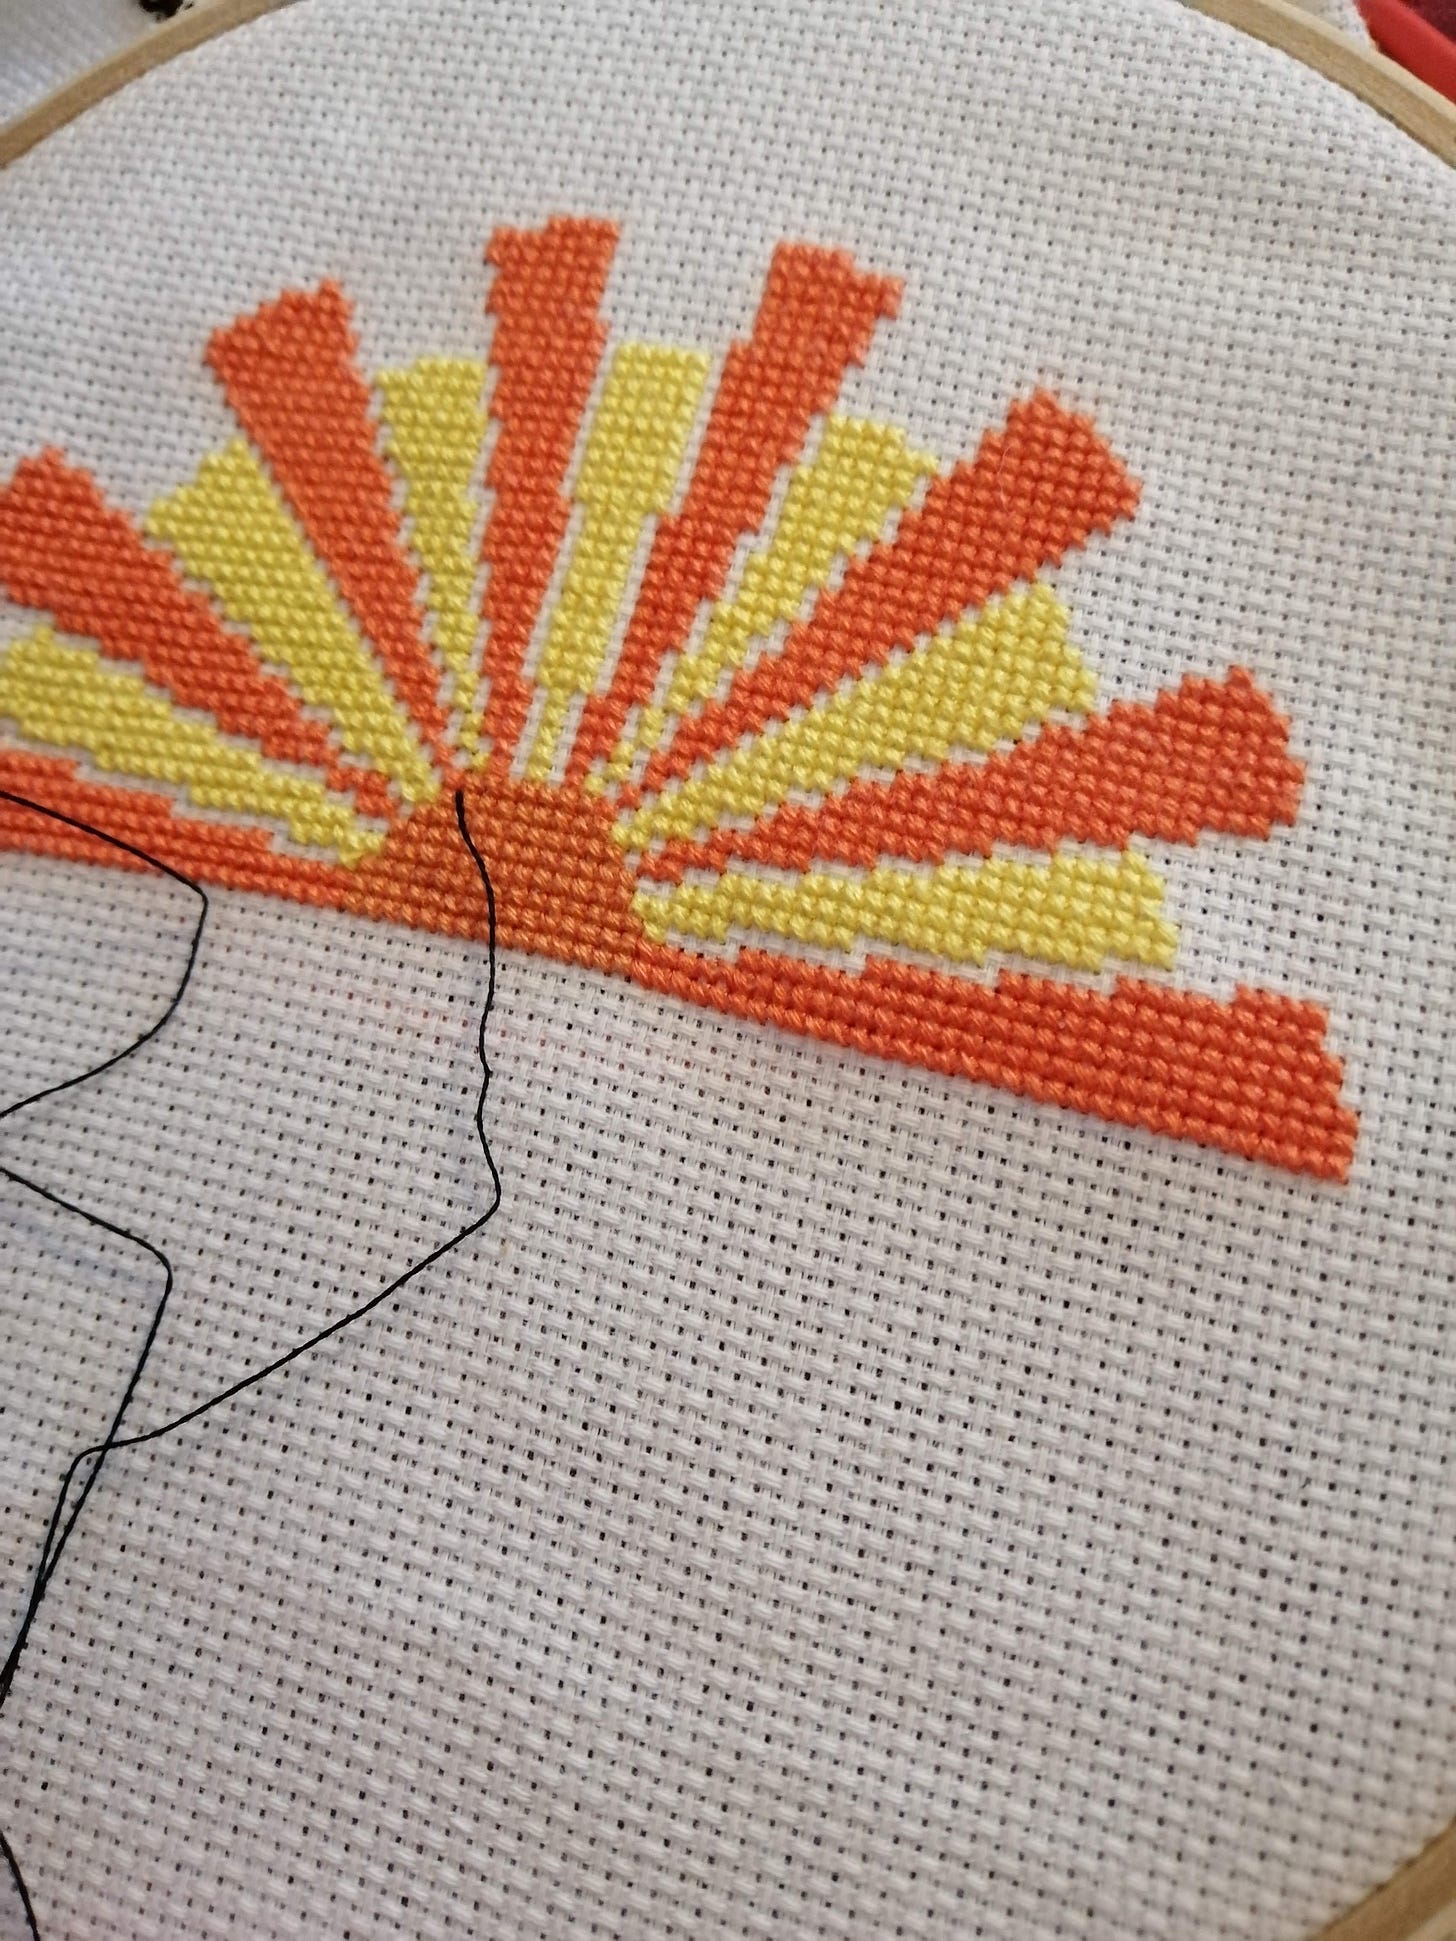 Cross stitch in a hoop with a rising sun from the Edmonds baking logo